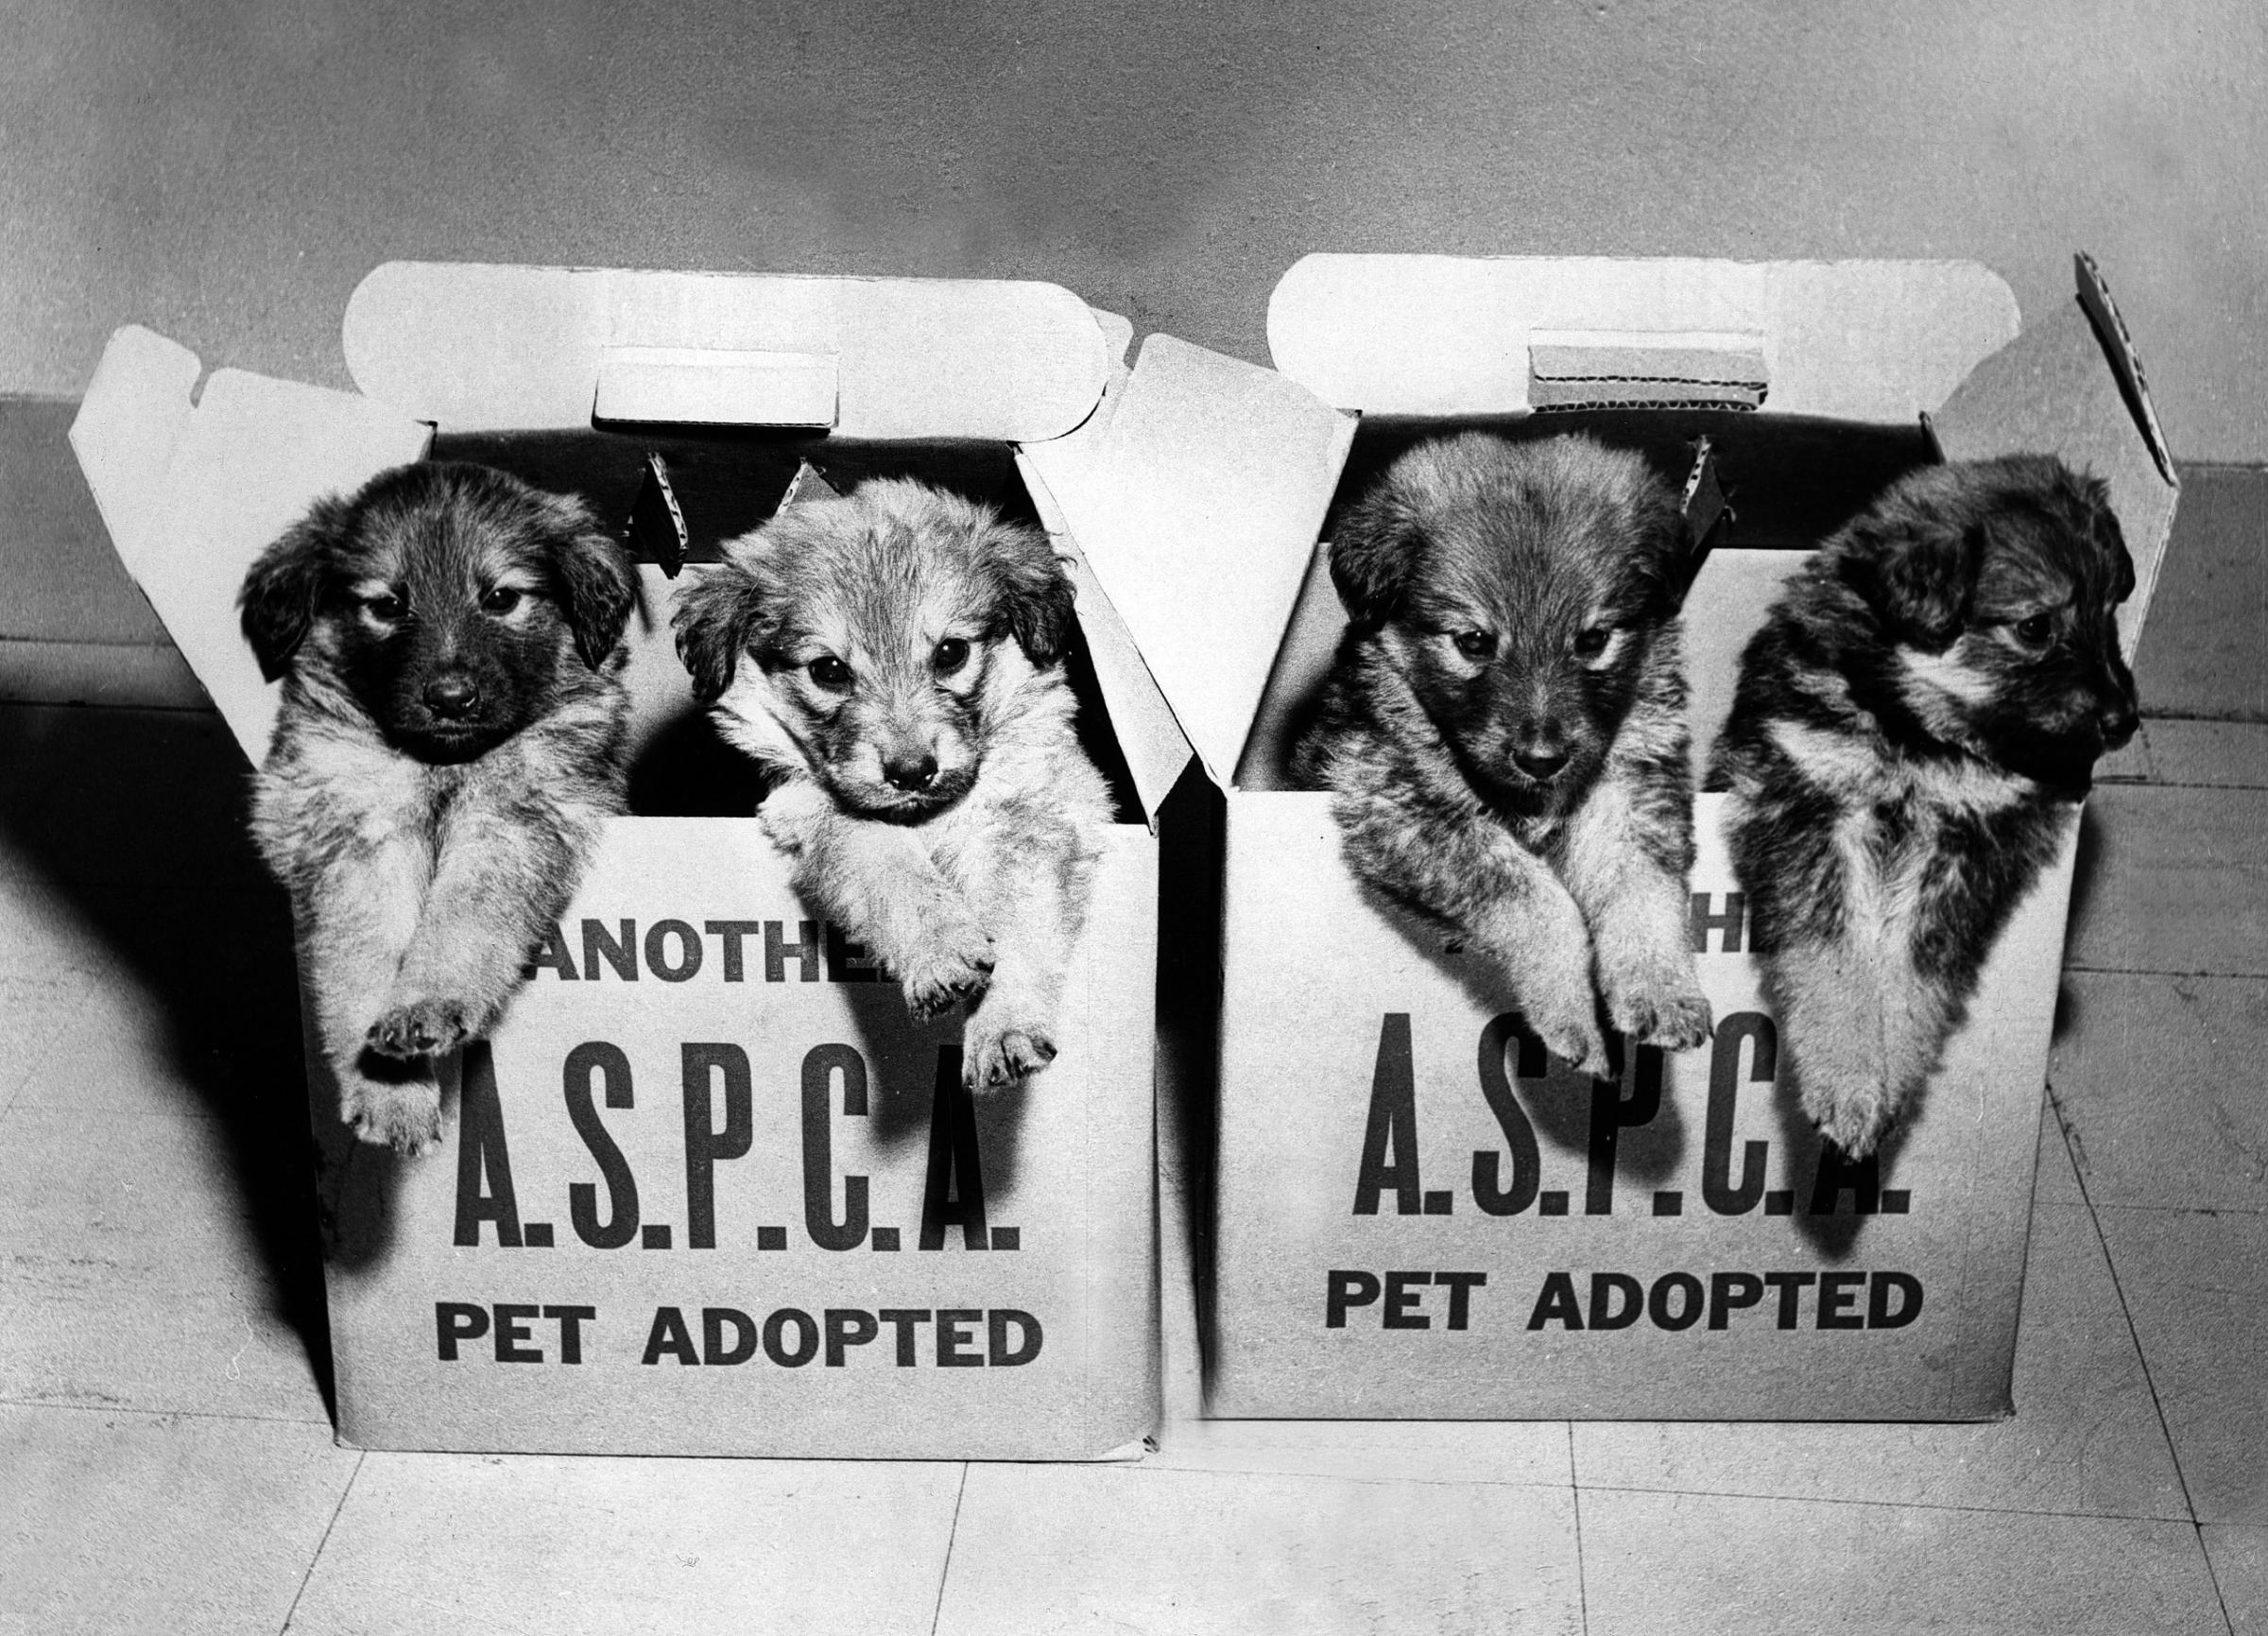 ASPCA rescue puppies in cardboard pet transport boxes, 1970s